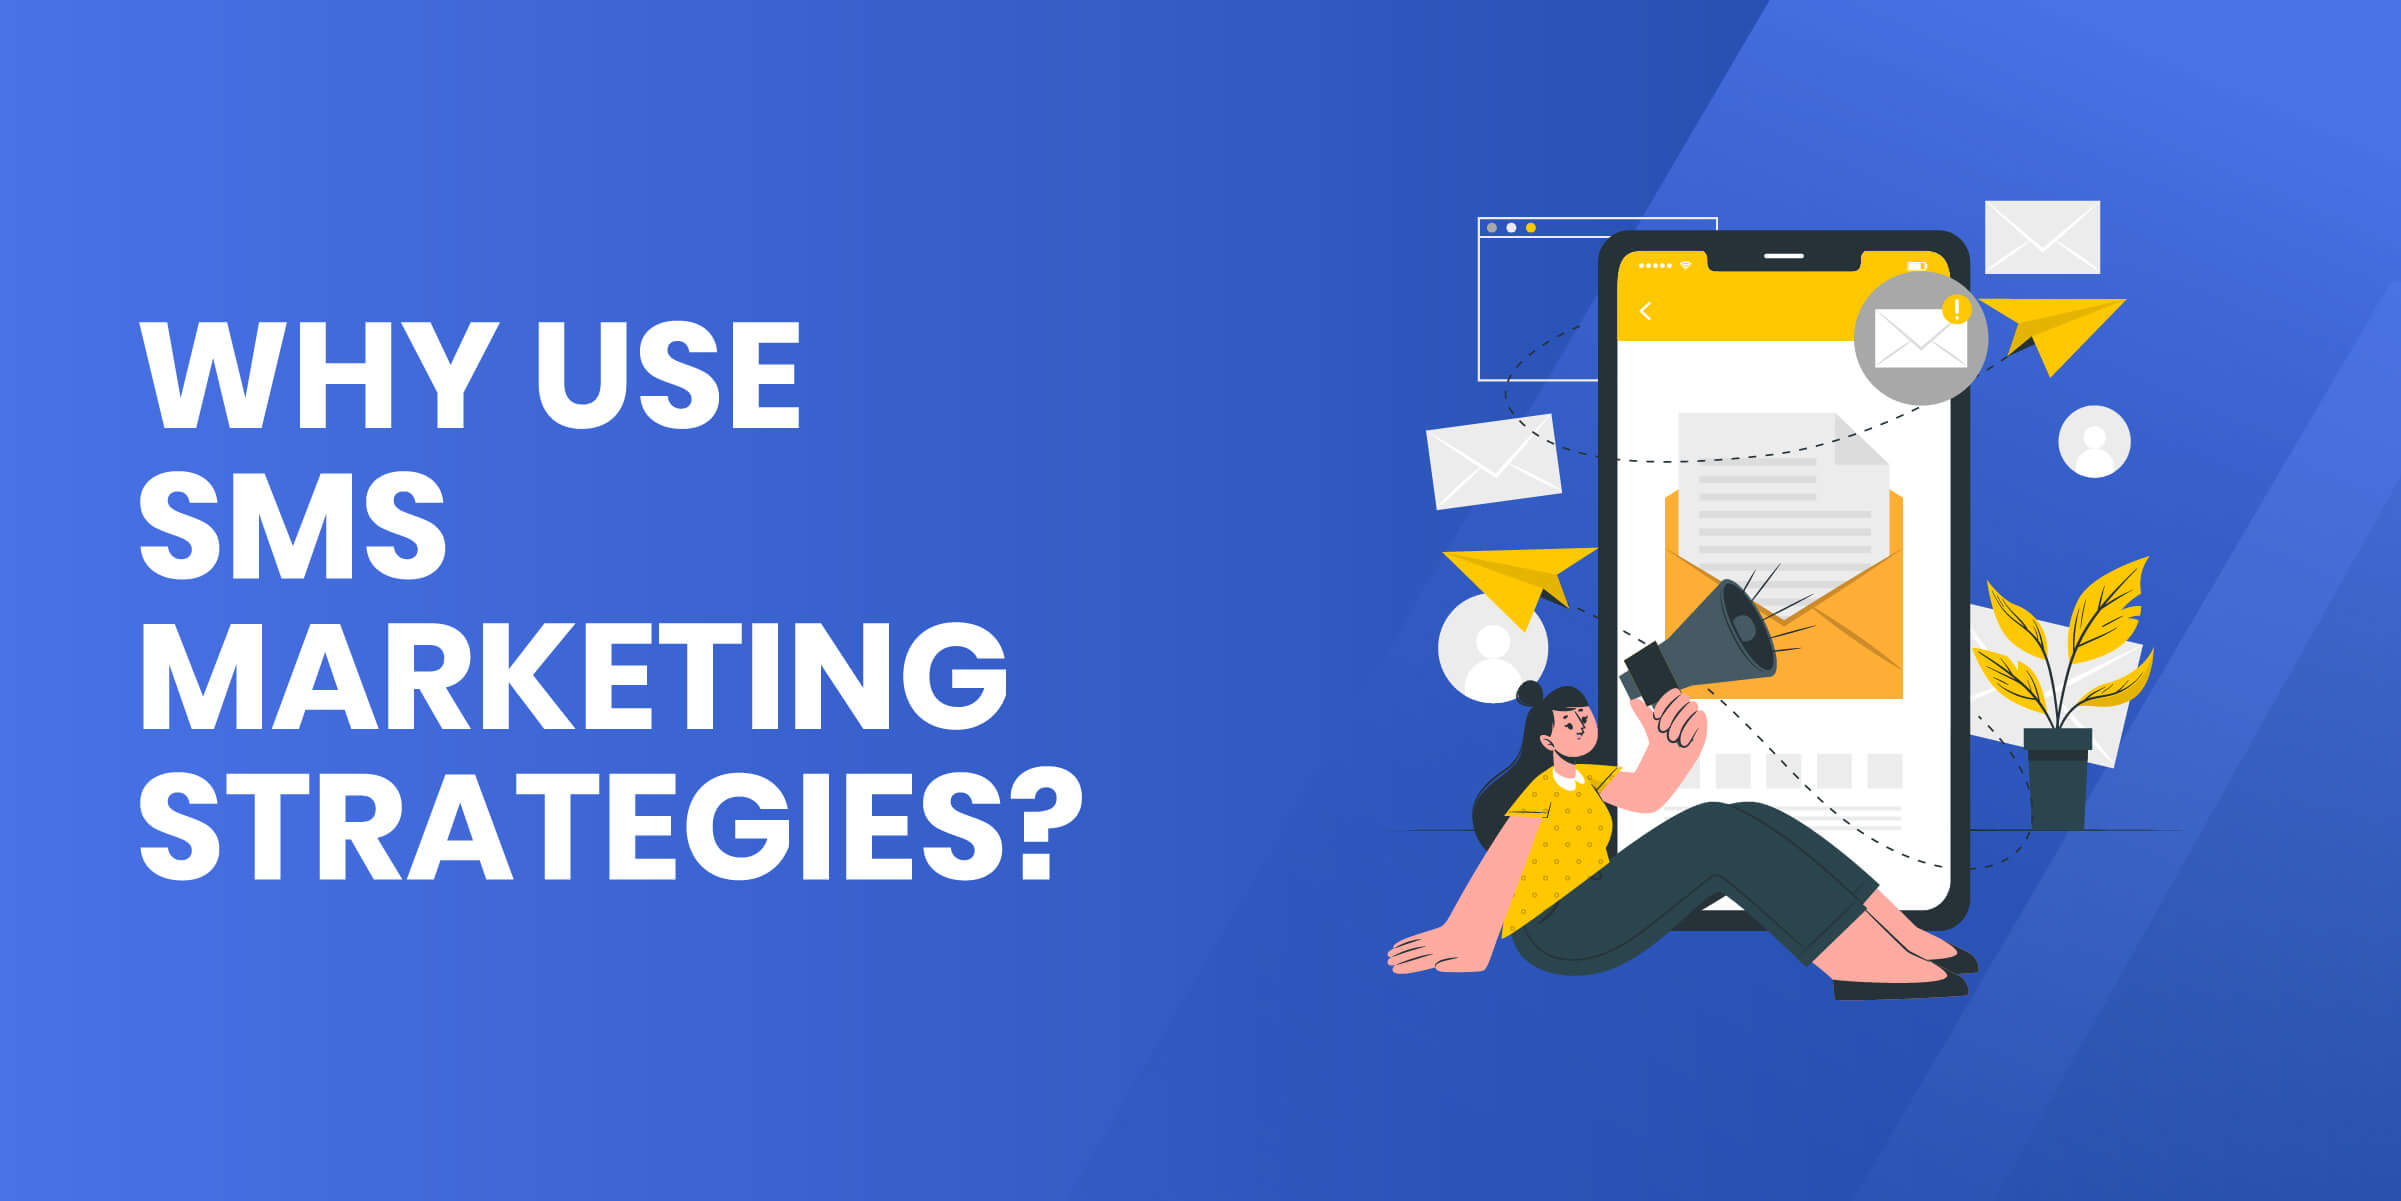 Why Use SMS Marketing Strategies